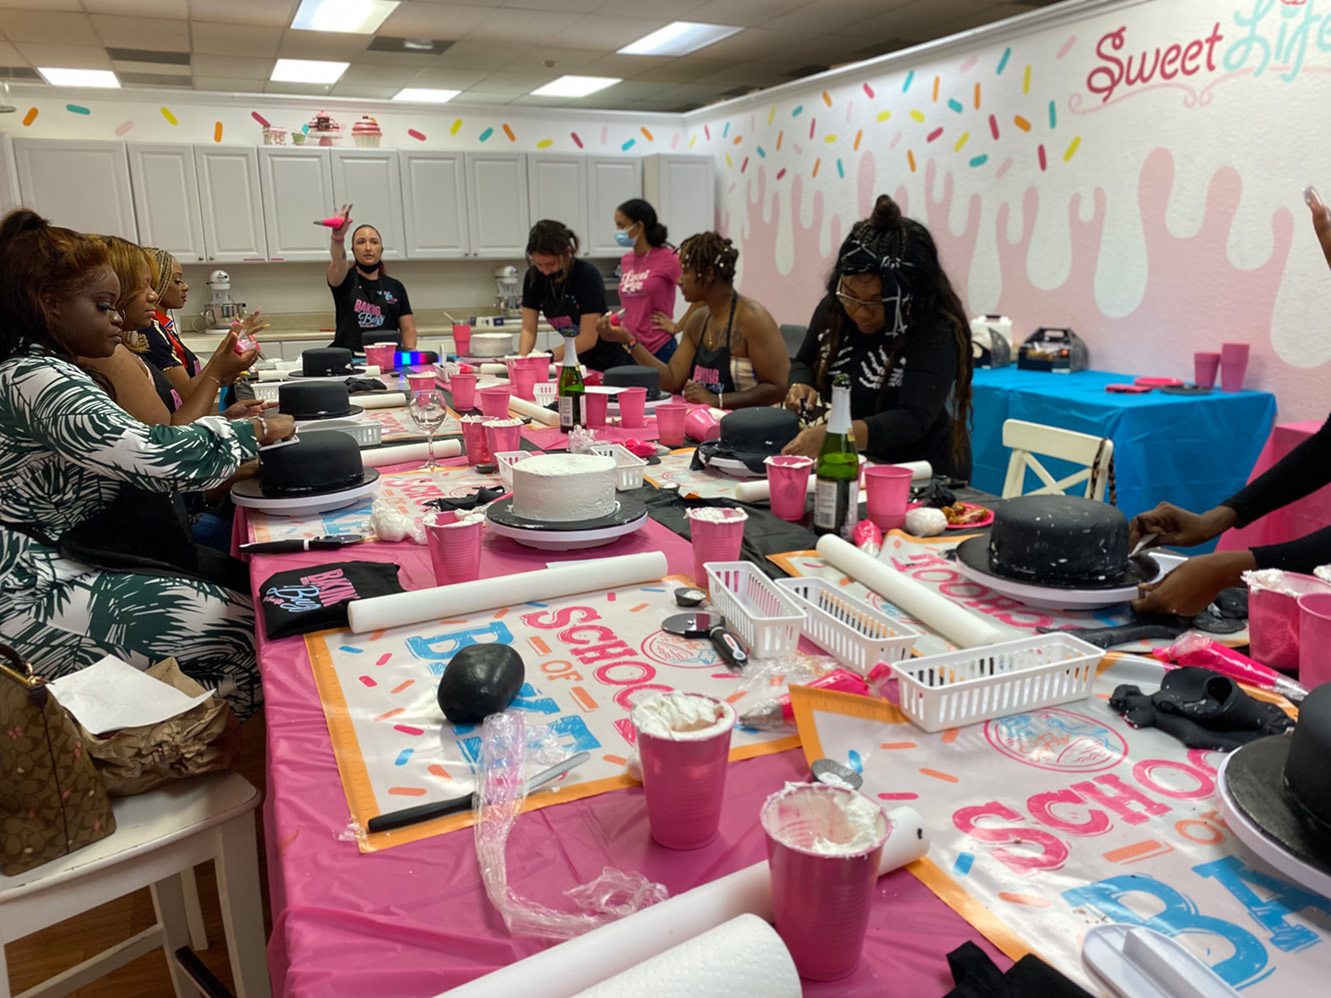 Adult cake decorating class in Miami